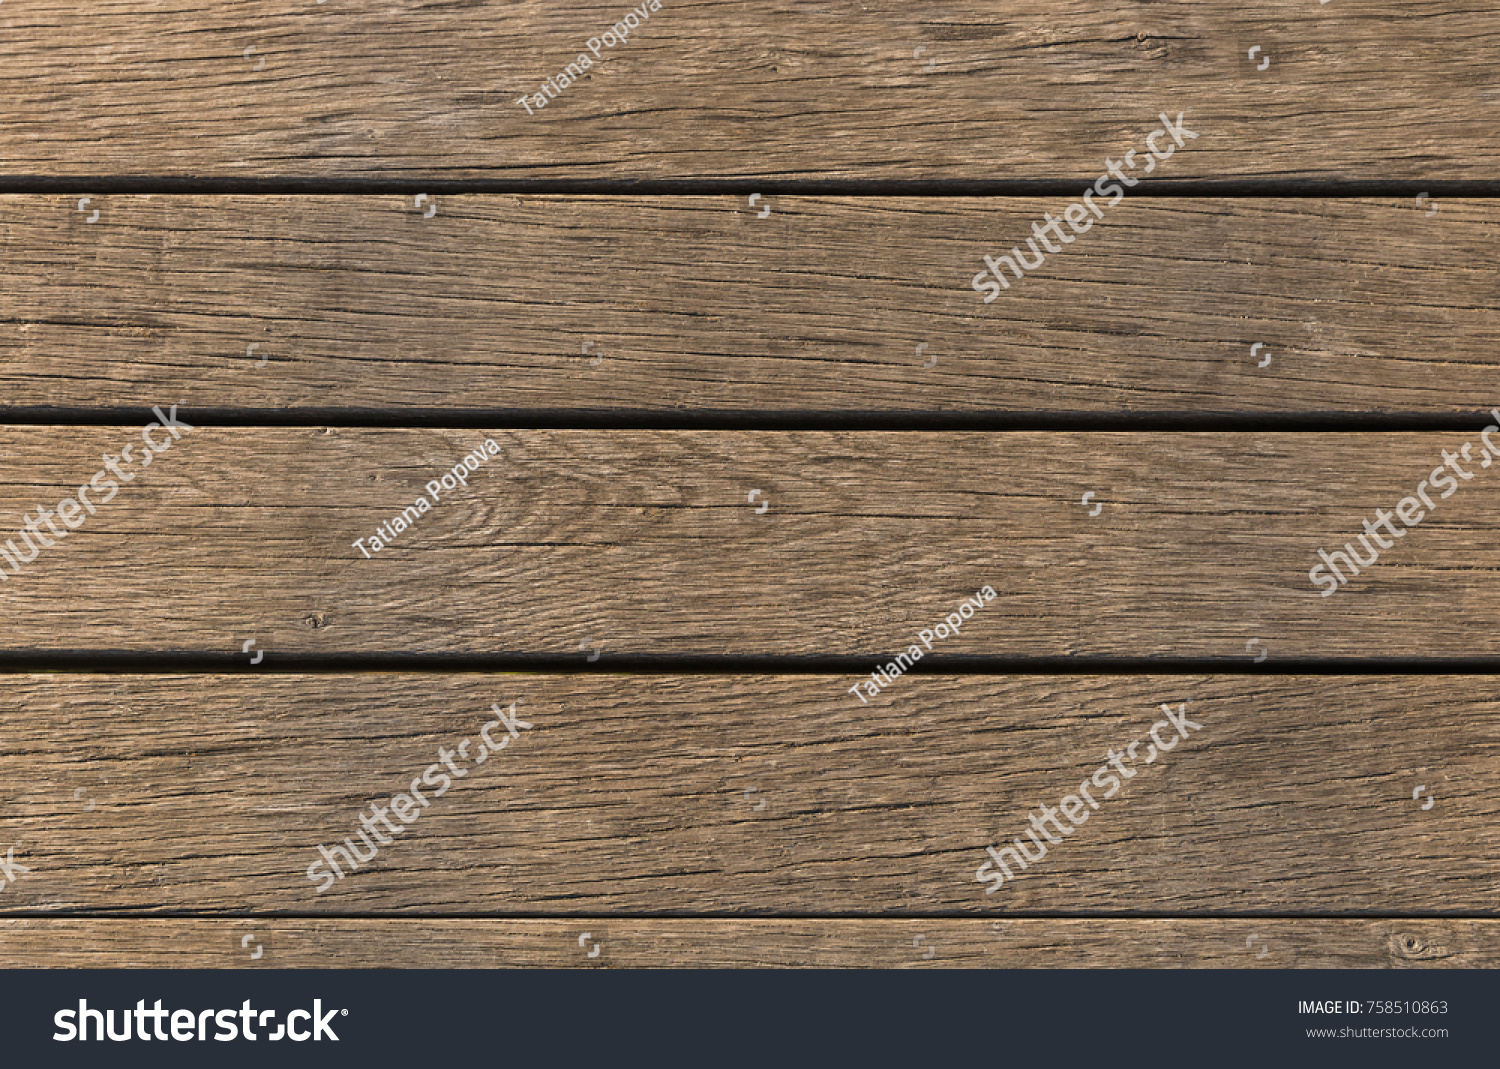 Wood board background - abstract wooden retro texture #758510863